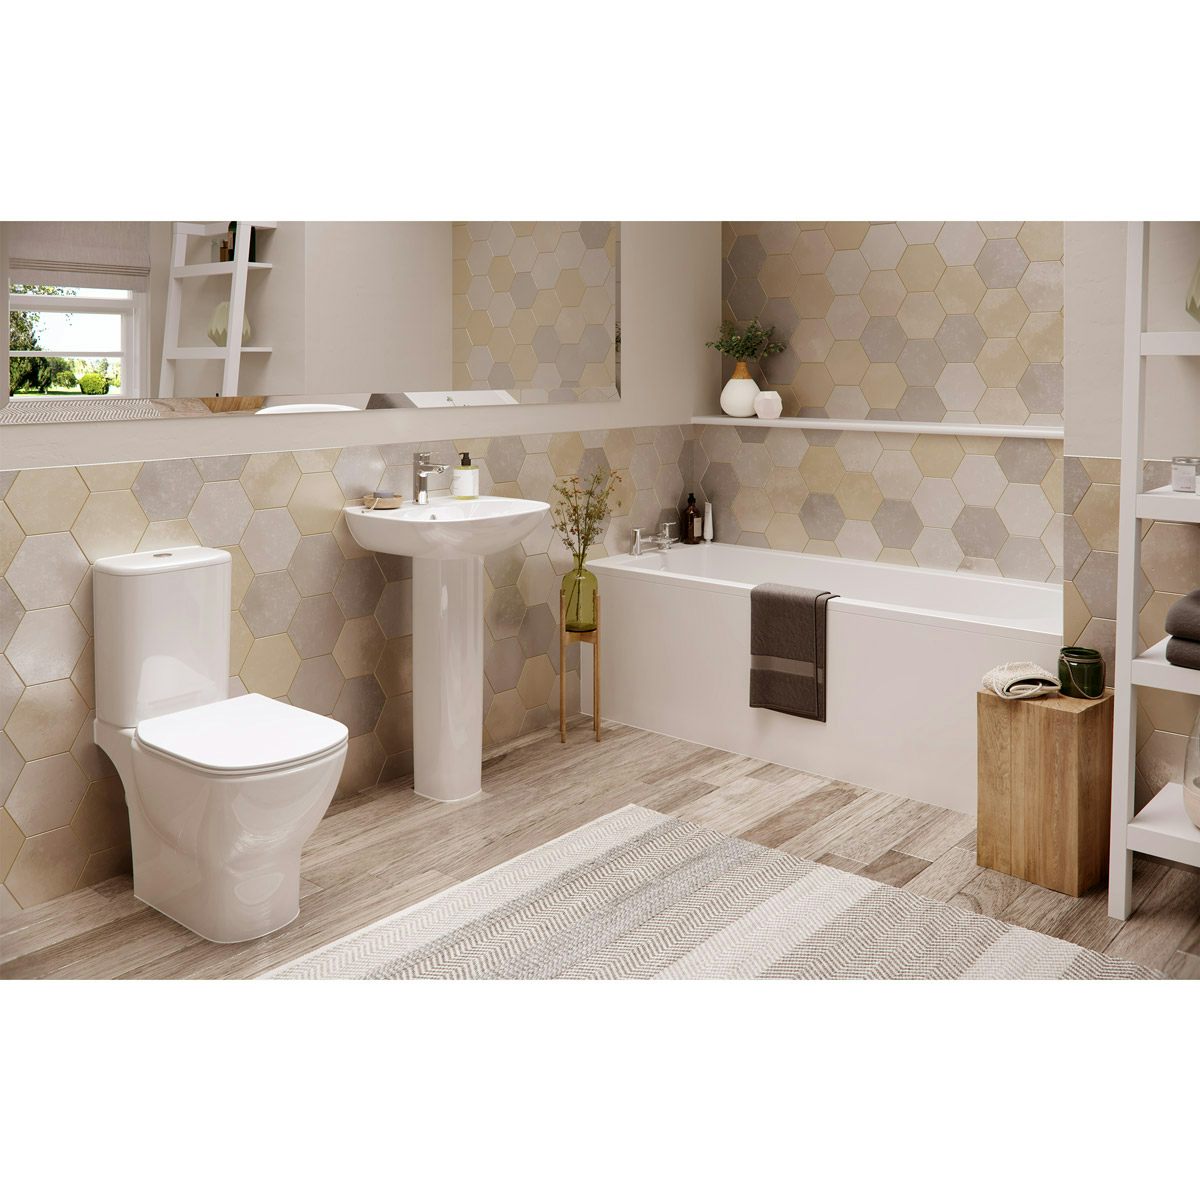 Ideal Standard Tesi complete bathroom suite with straight ...